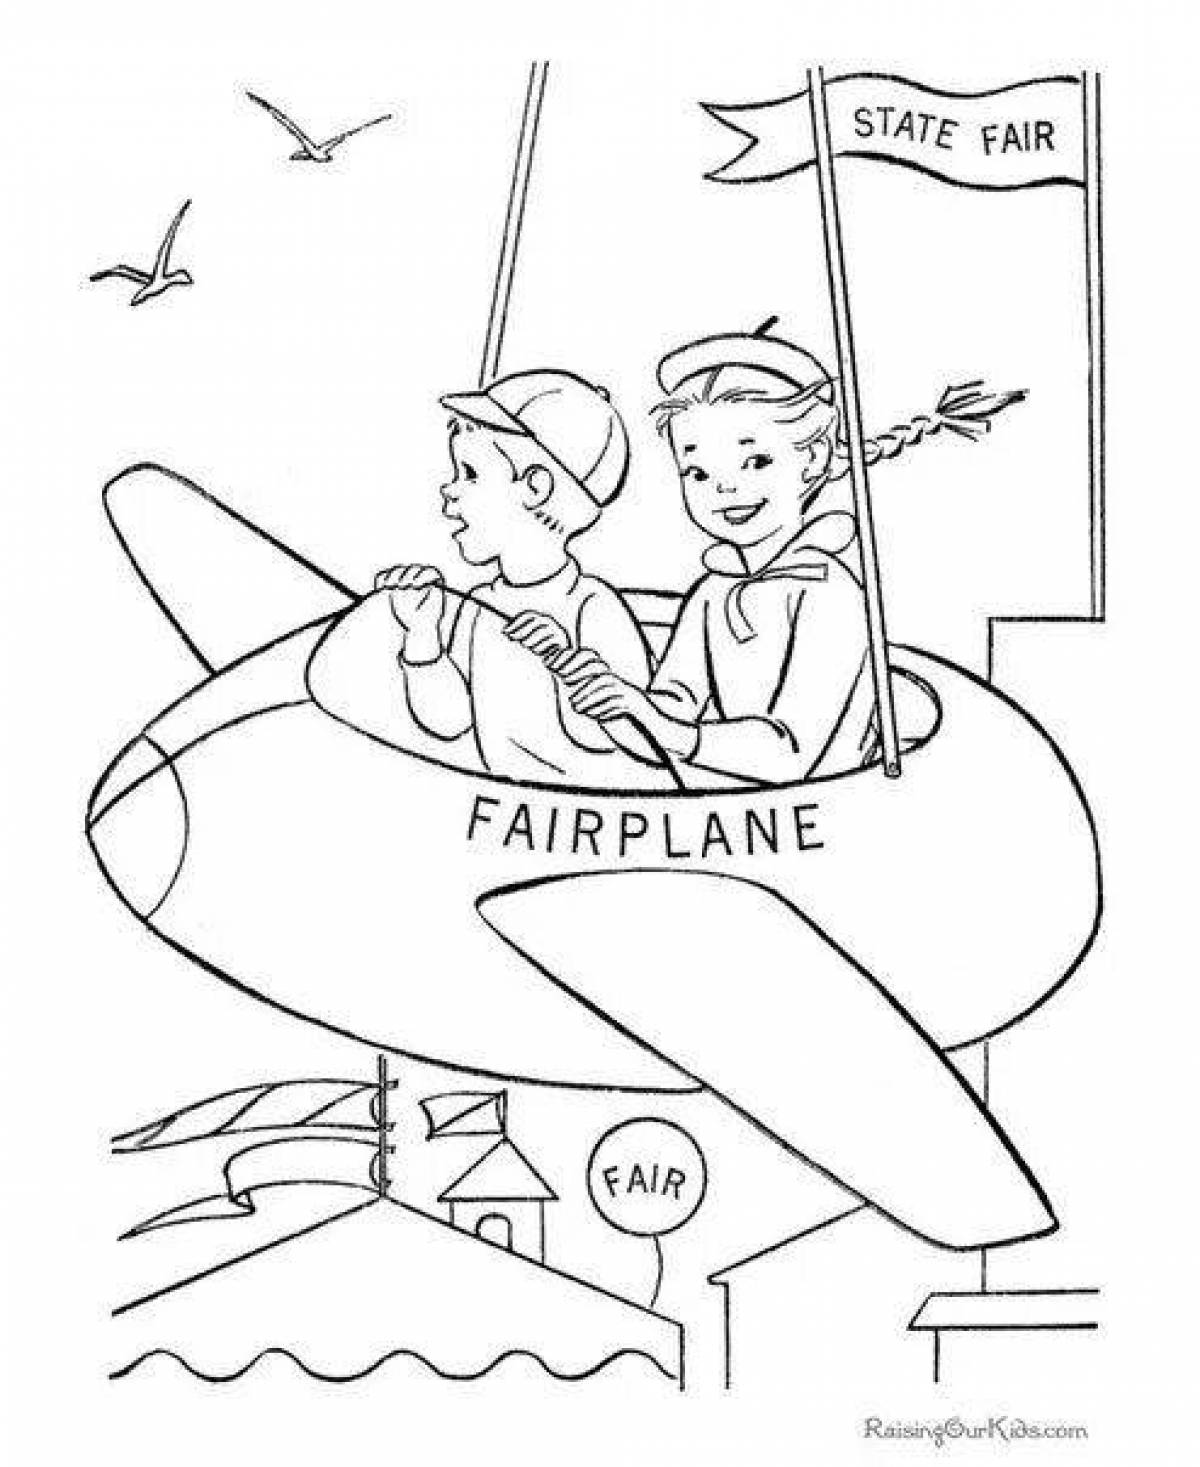 Amazing Pilot Coloring Page for Kids